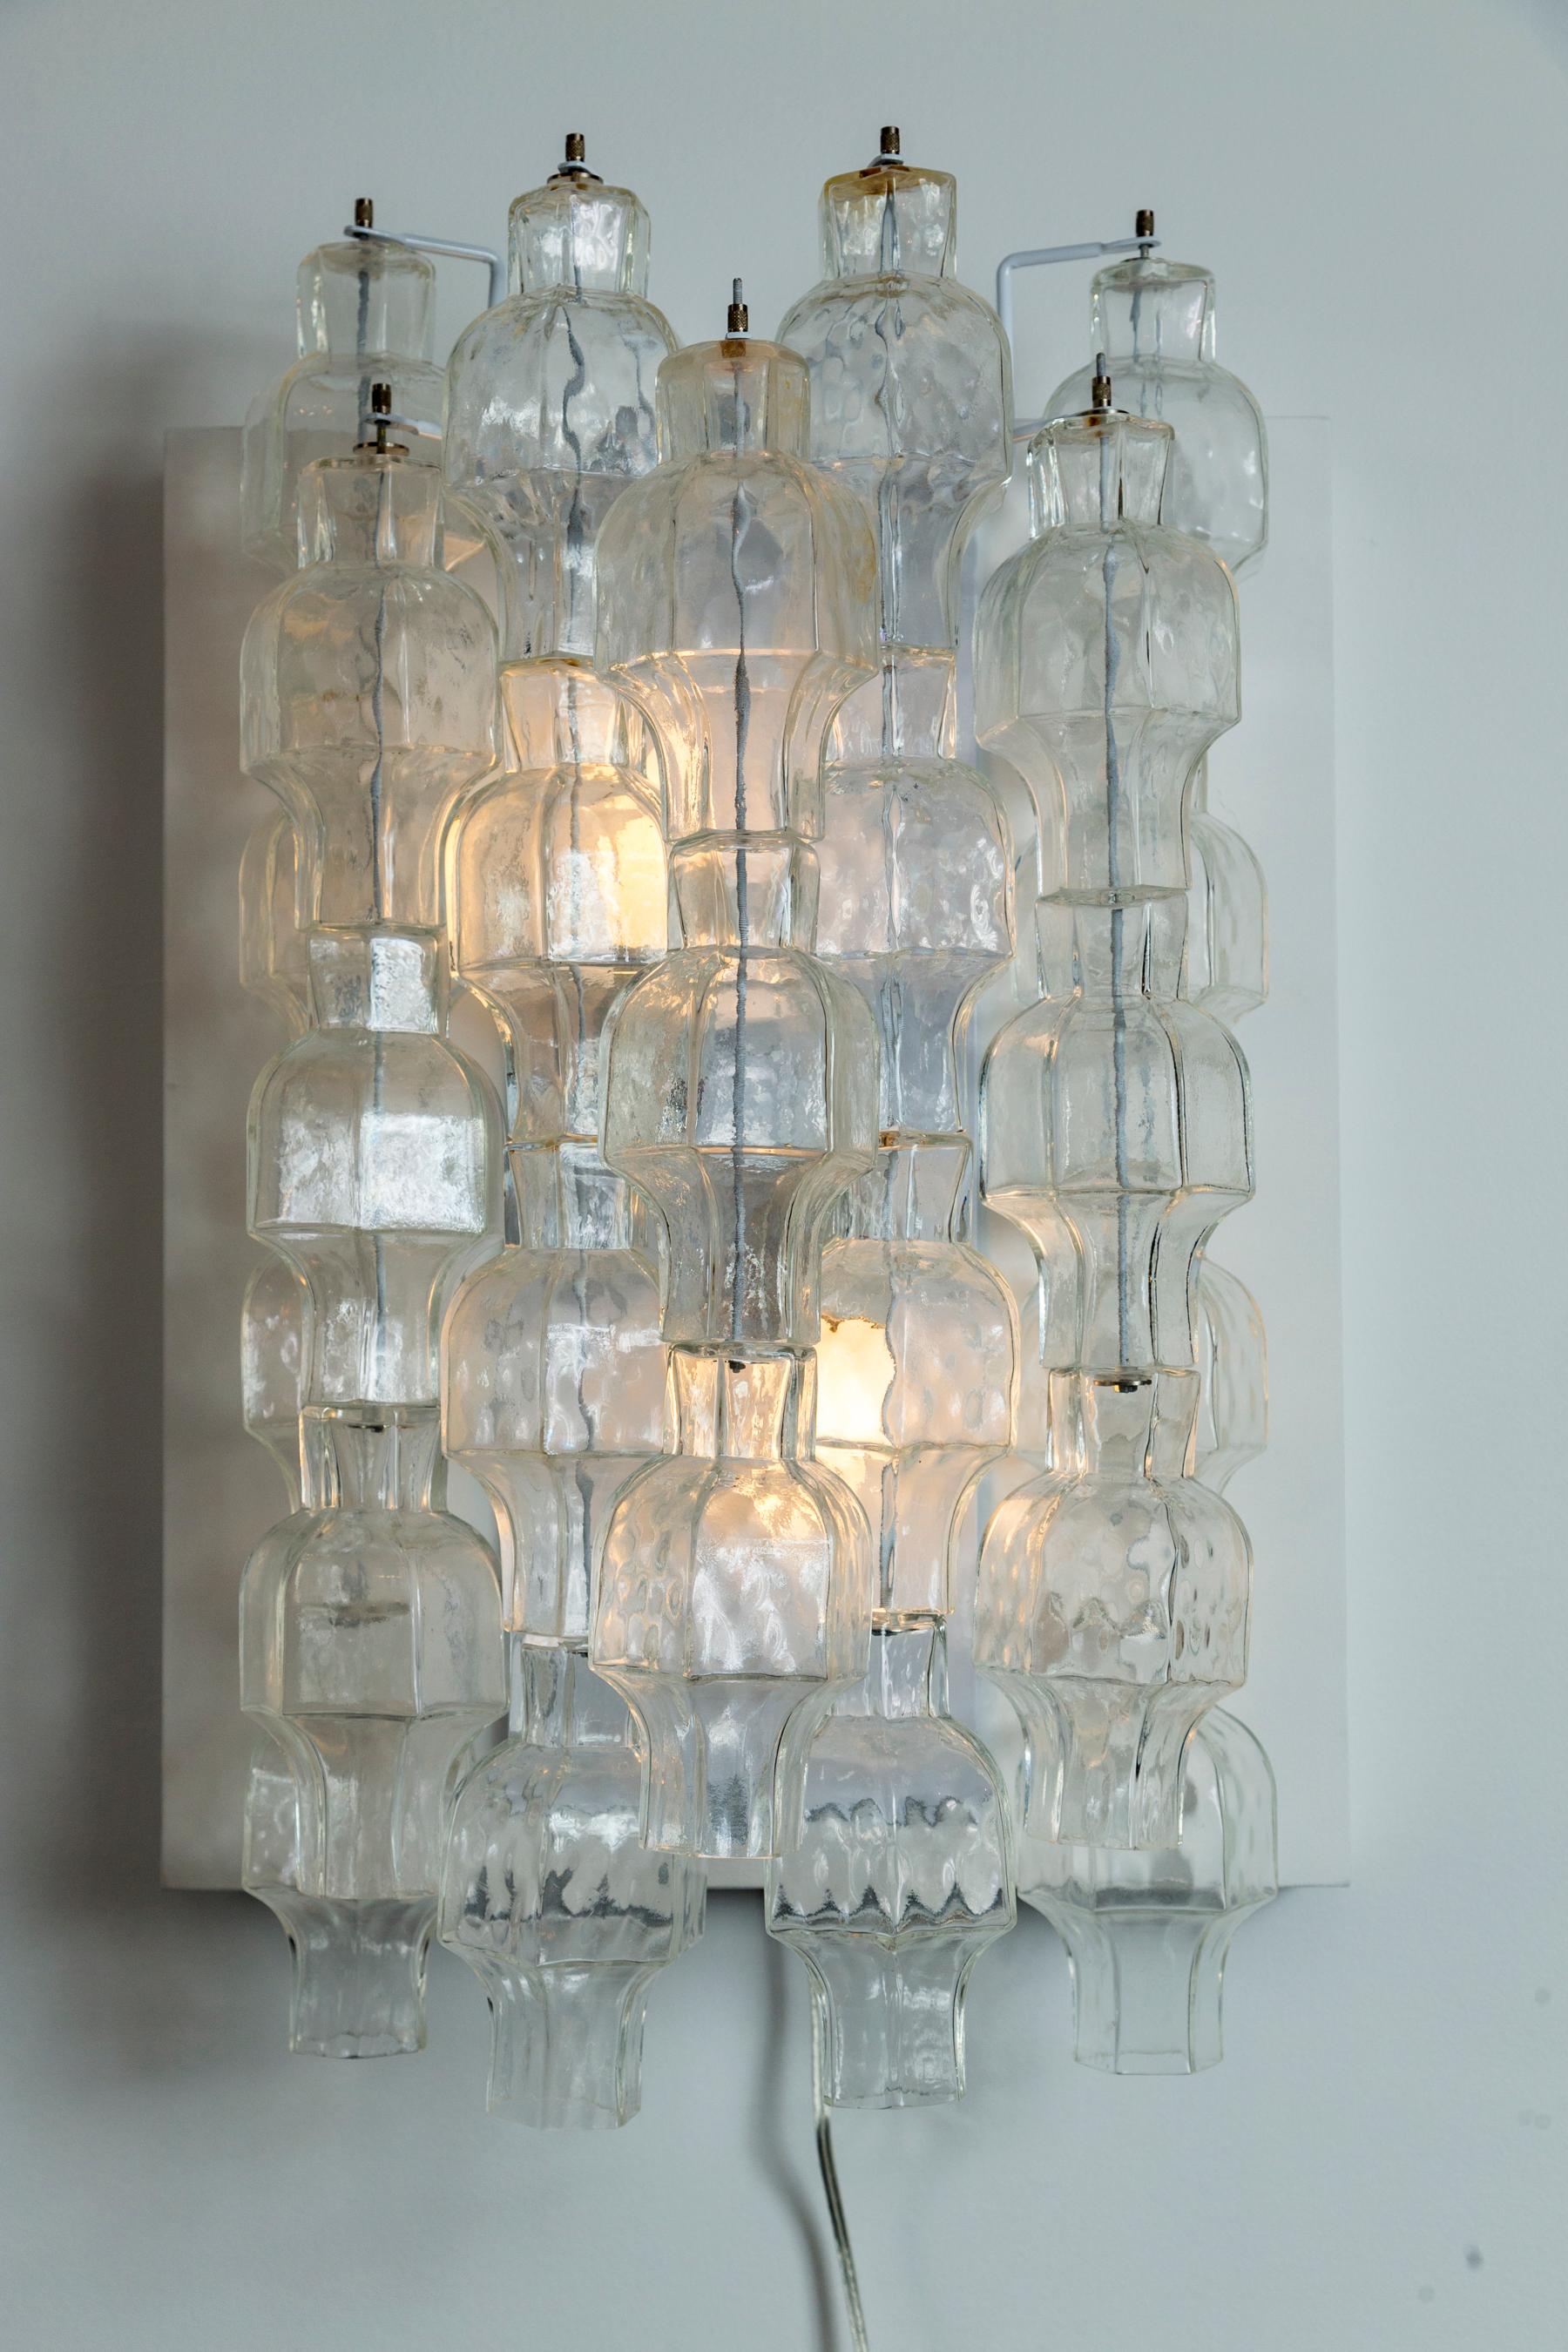 This unique glass form is an unusual take from Venini’s polyhedri form originating from the 1960’s

Each wall light is composed of seven tiers of cascading rounded polydhri glass grouped in three and fours.

This vintage glass is newly mounted